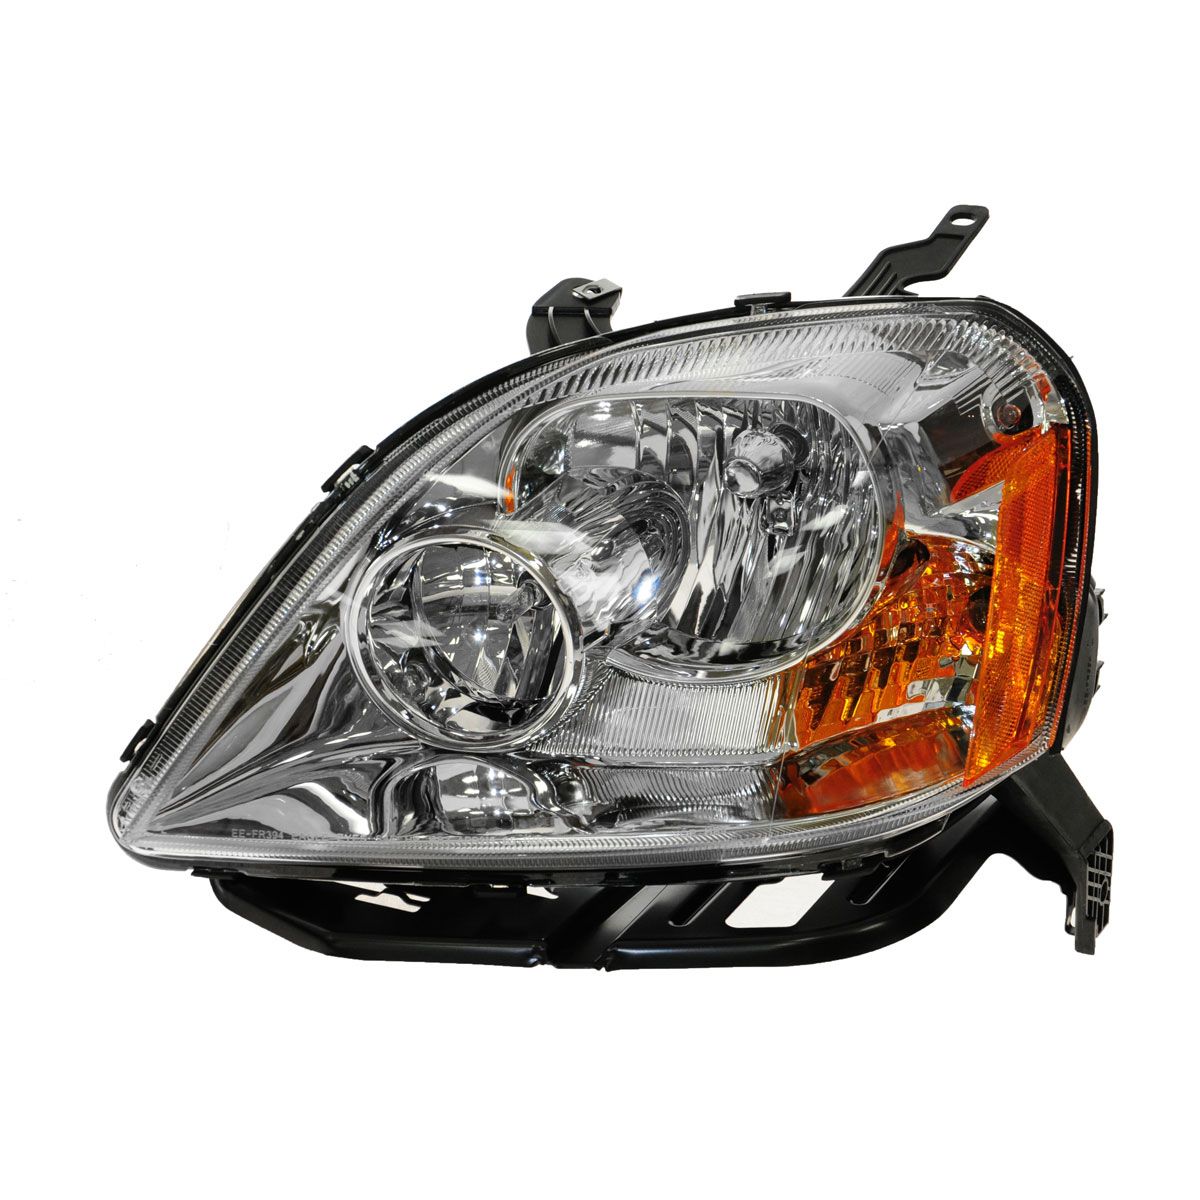 Headlight Headlamp Driver Side Left LH NEW for 05-07 Ford Five Hundred 500 192659056689 | eBay 2005 Ford Five Hundred Headlight Bulb Replacement